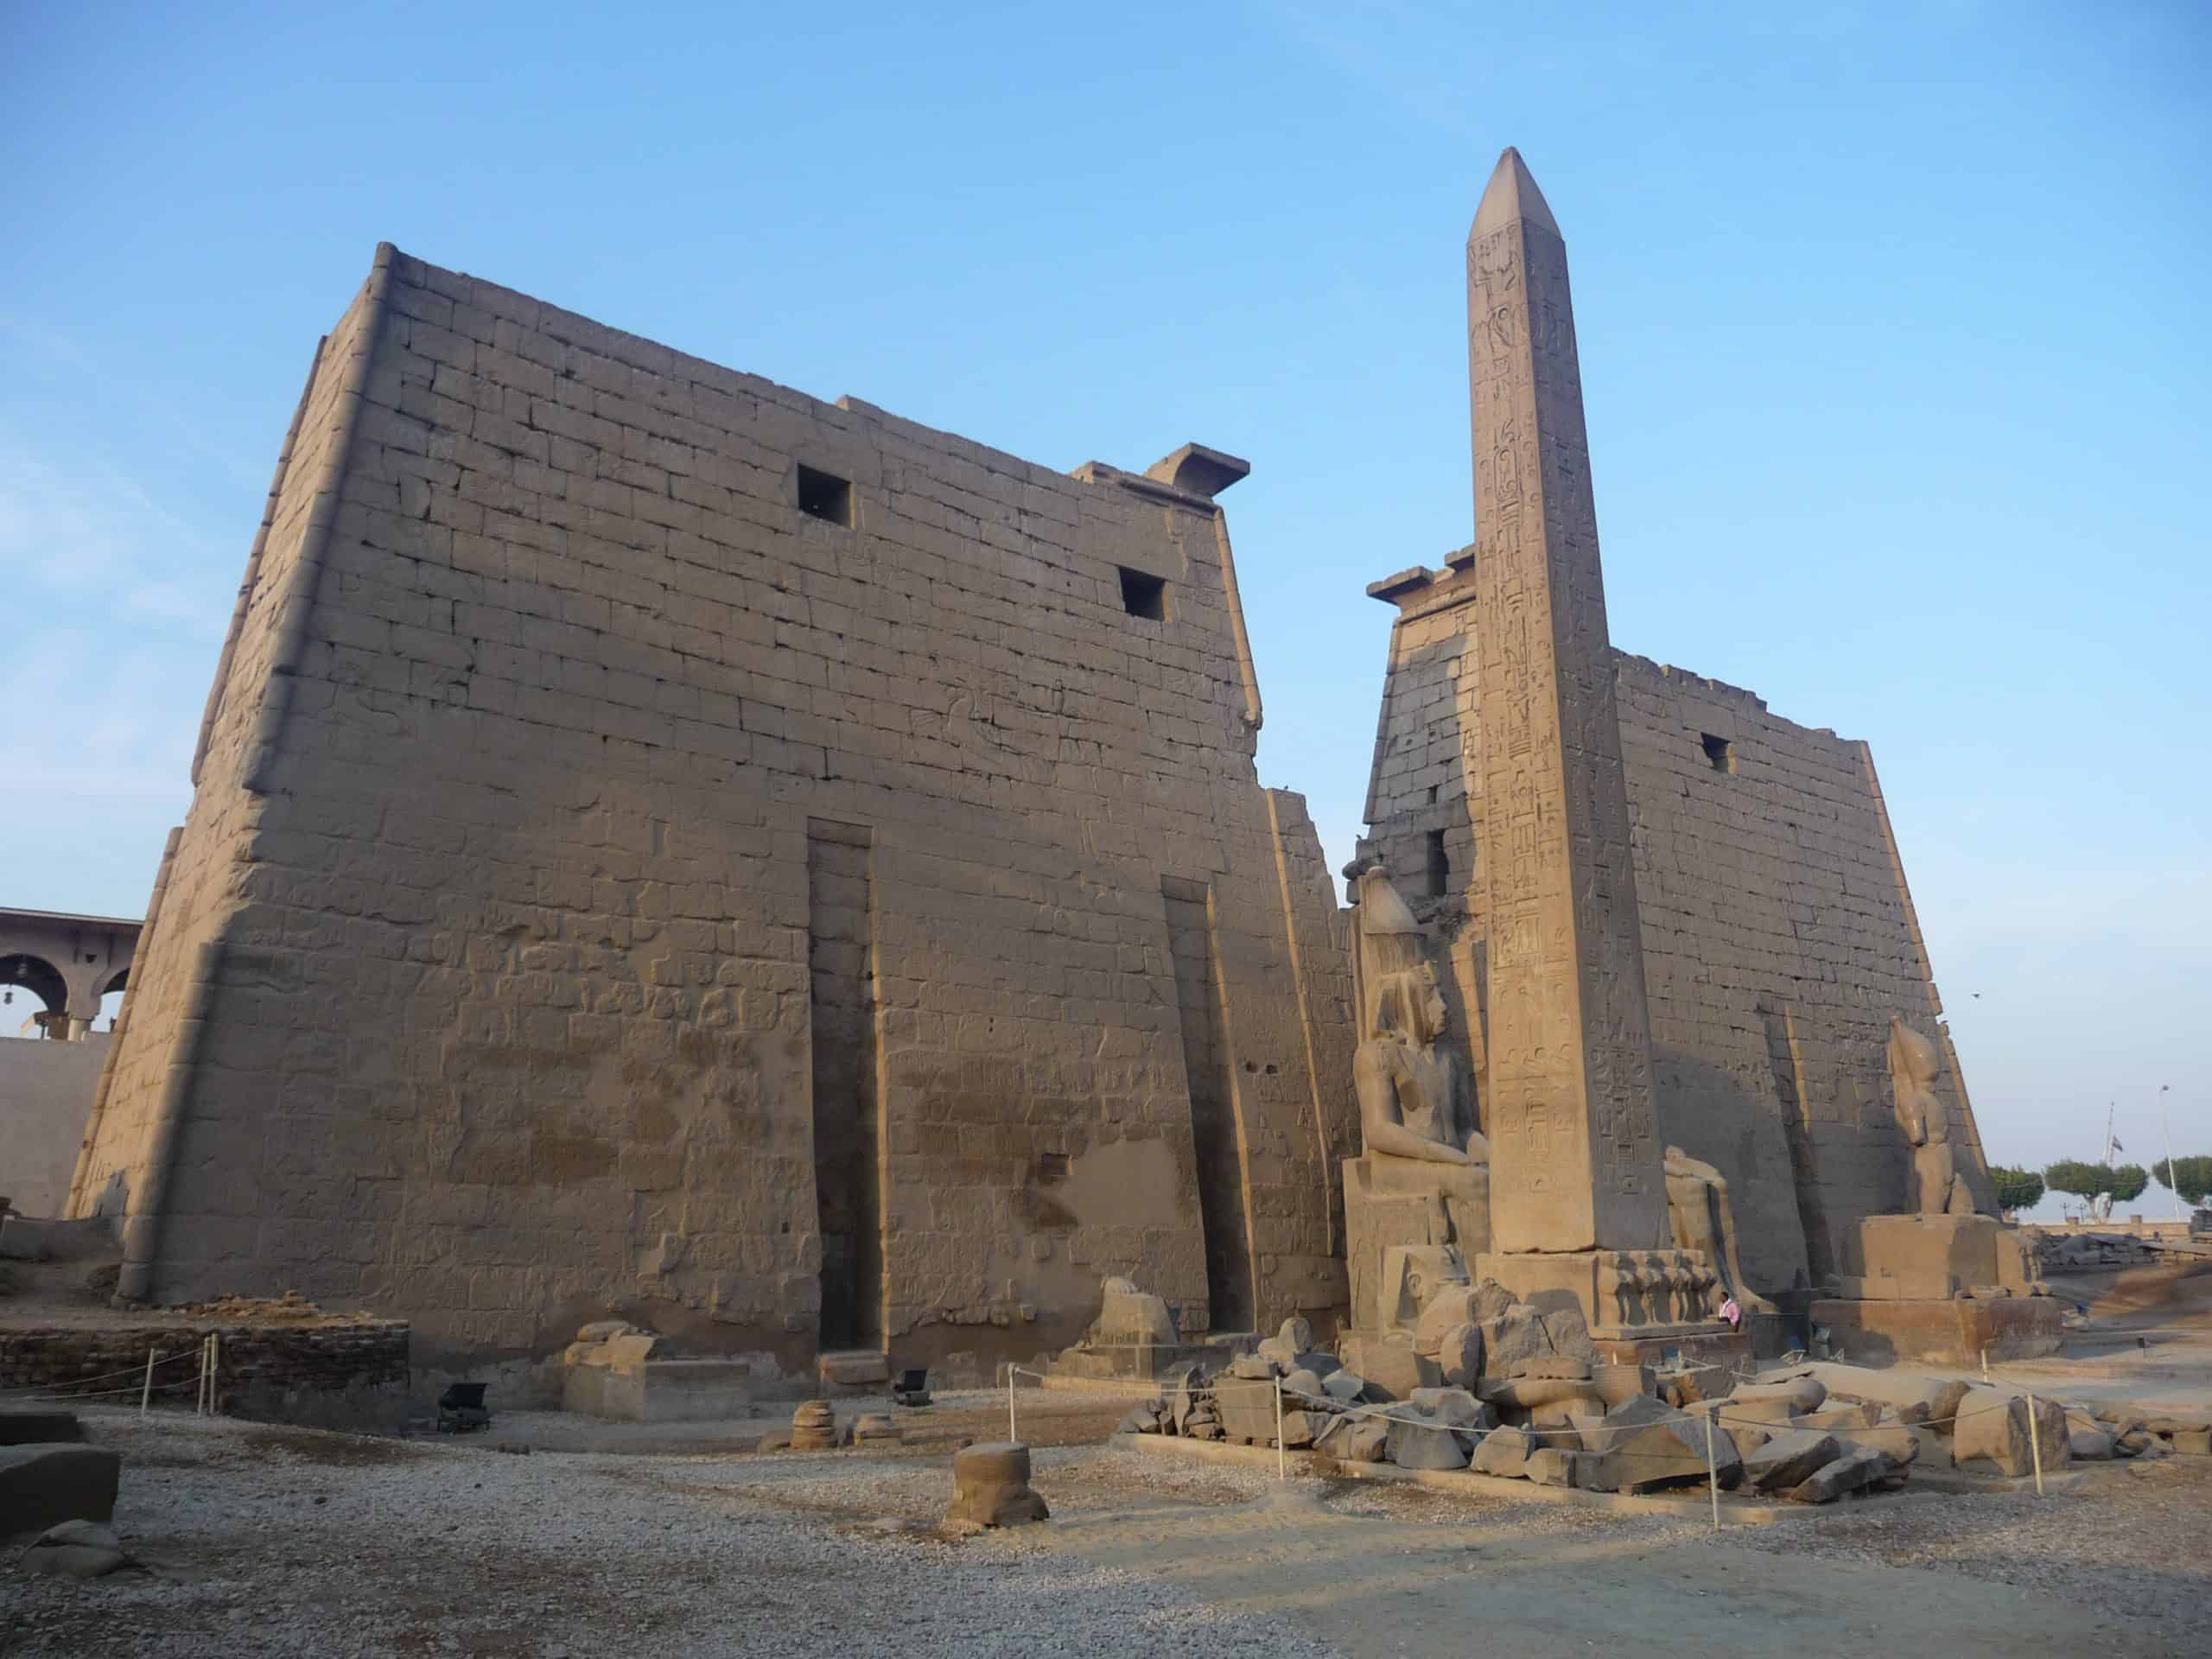 Karnak Temple and Luxor Temple